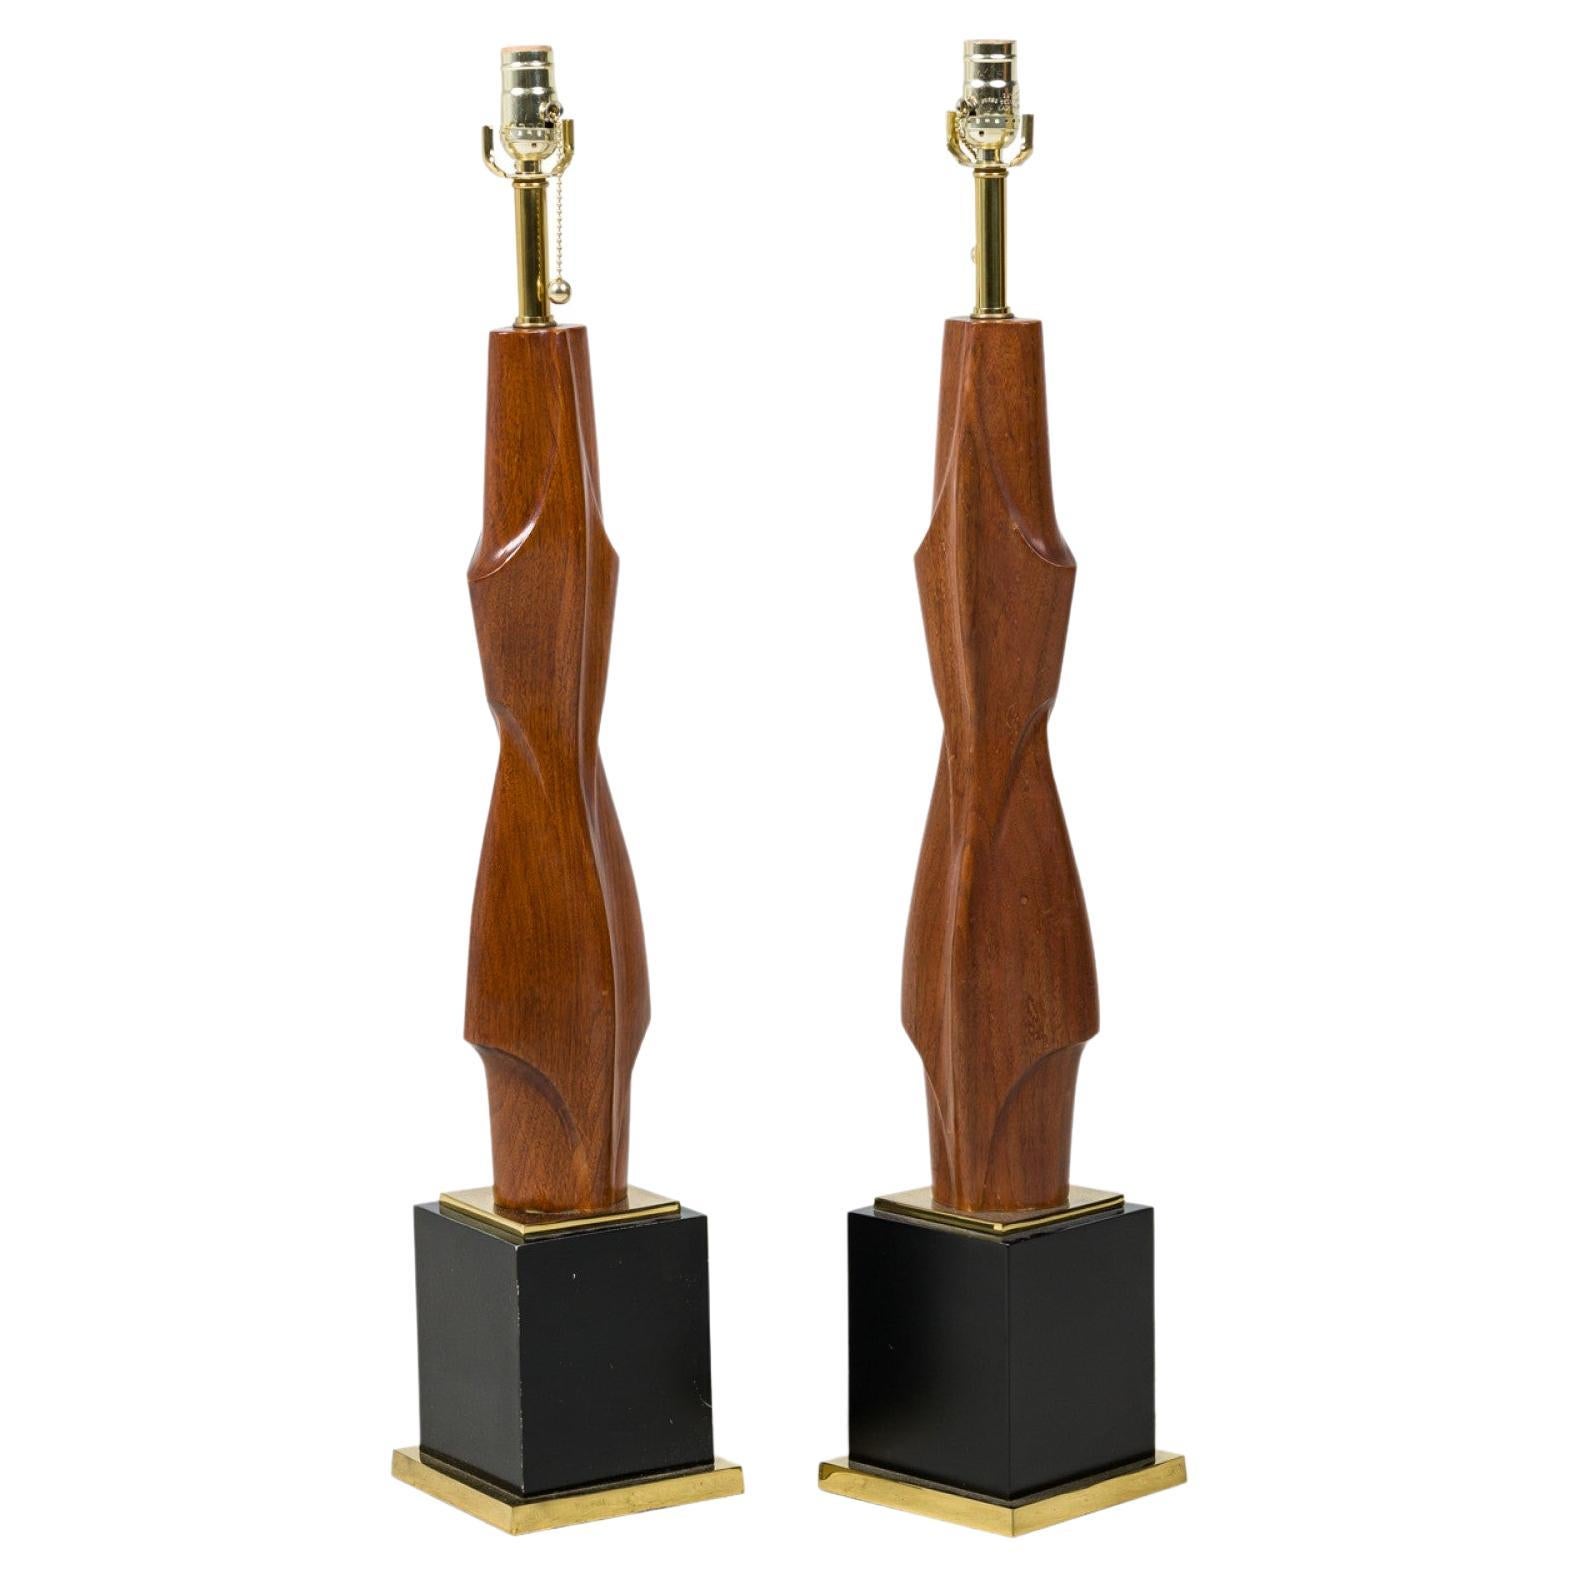 Pair of American Modern Mahogany and Brass Table Lamps, Laurel Lamp Company